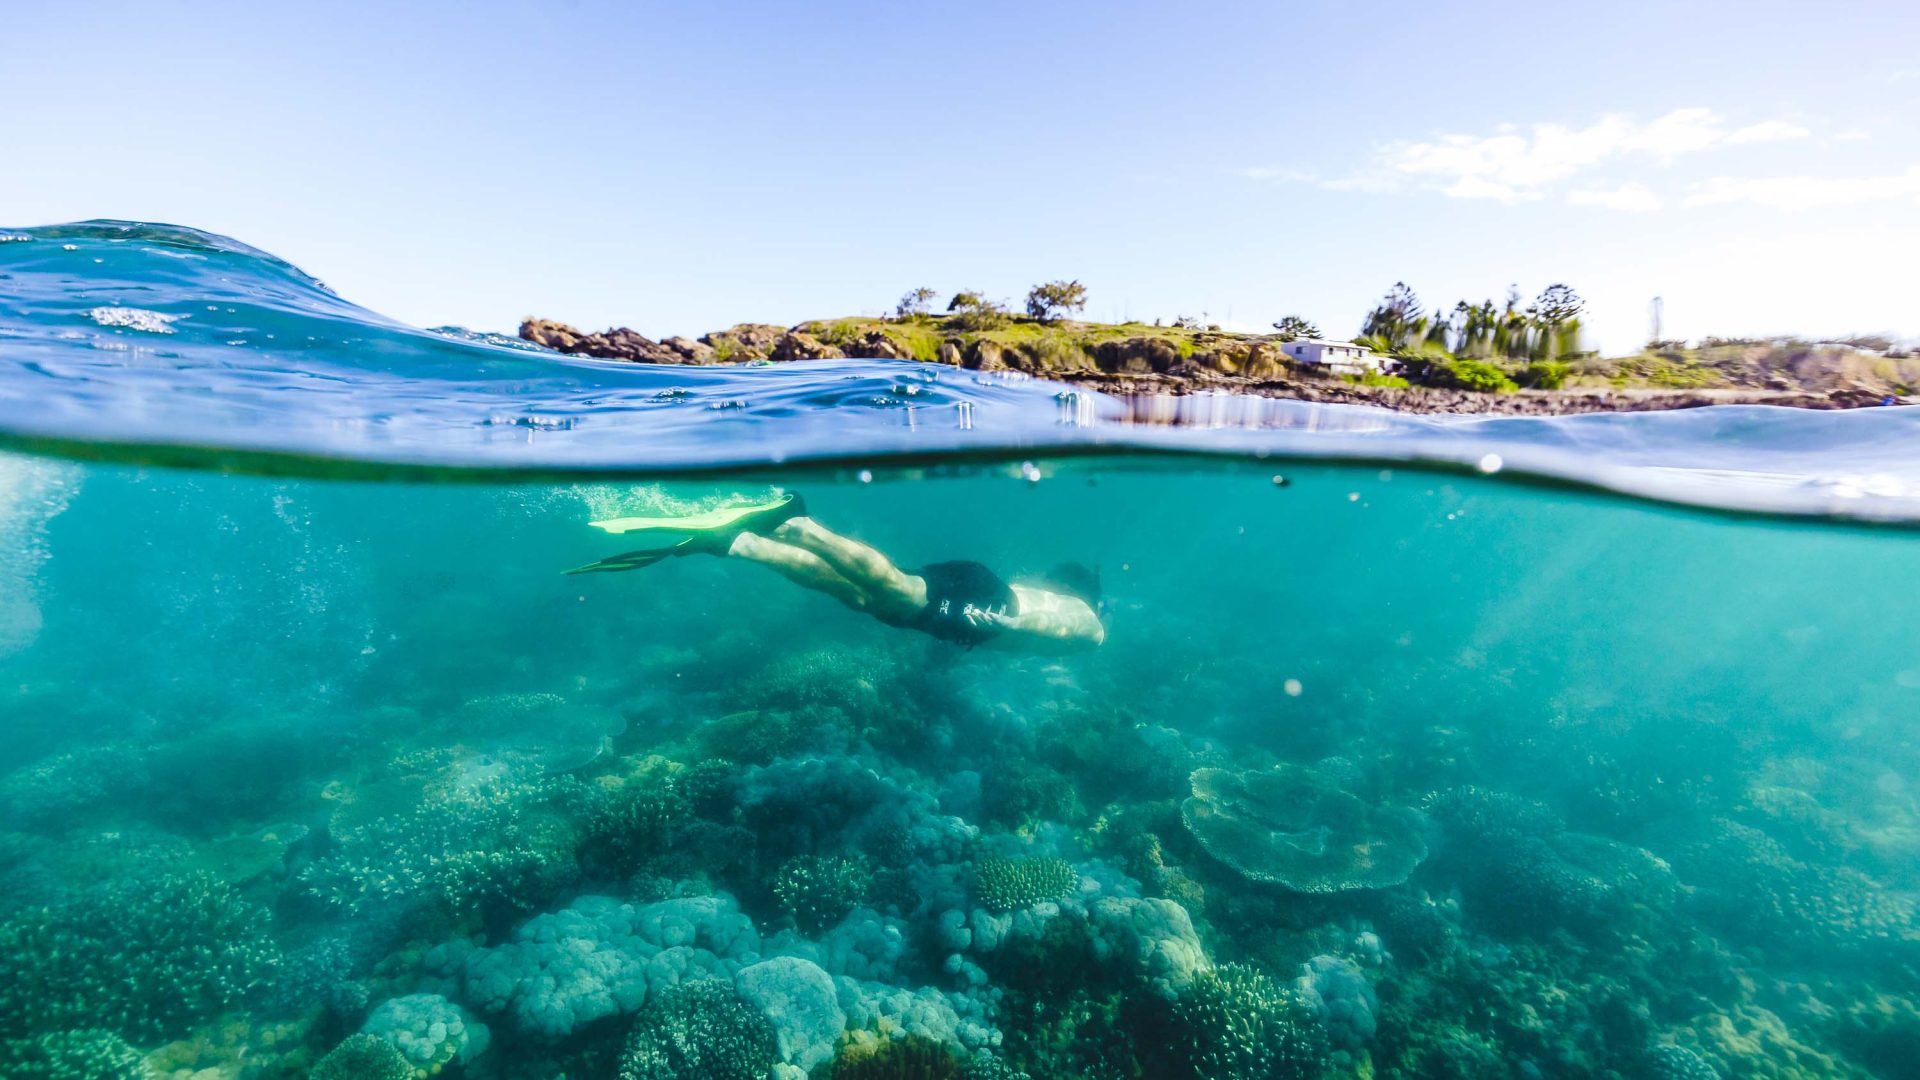 A snorkeler is visble just below the water line while reef and trees are visible in the background above it.